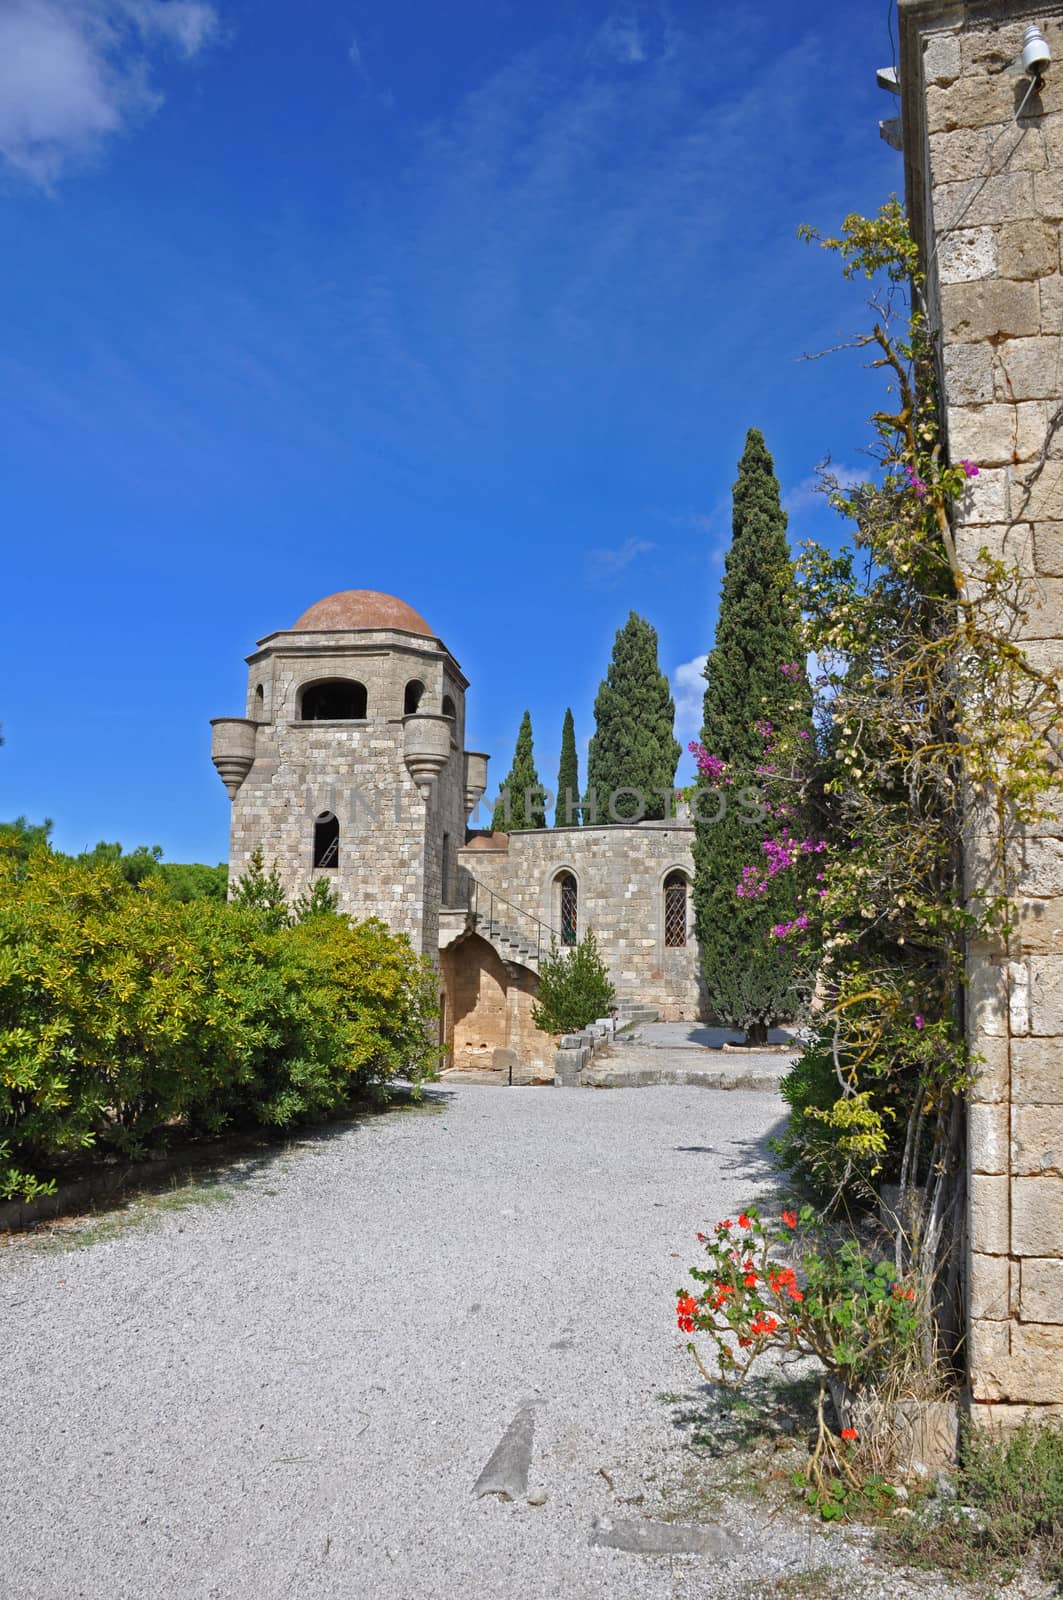 Church of our Lady at Ialyssos monastery on the Greek island of Rhodes is built at the top of Mount Filerimos